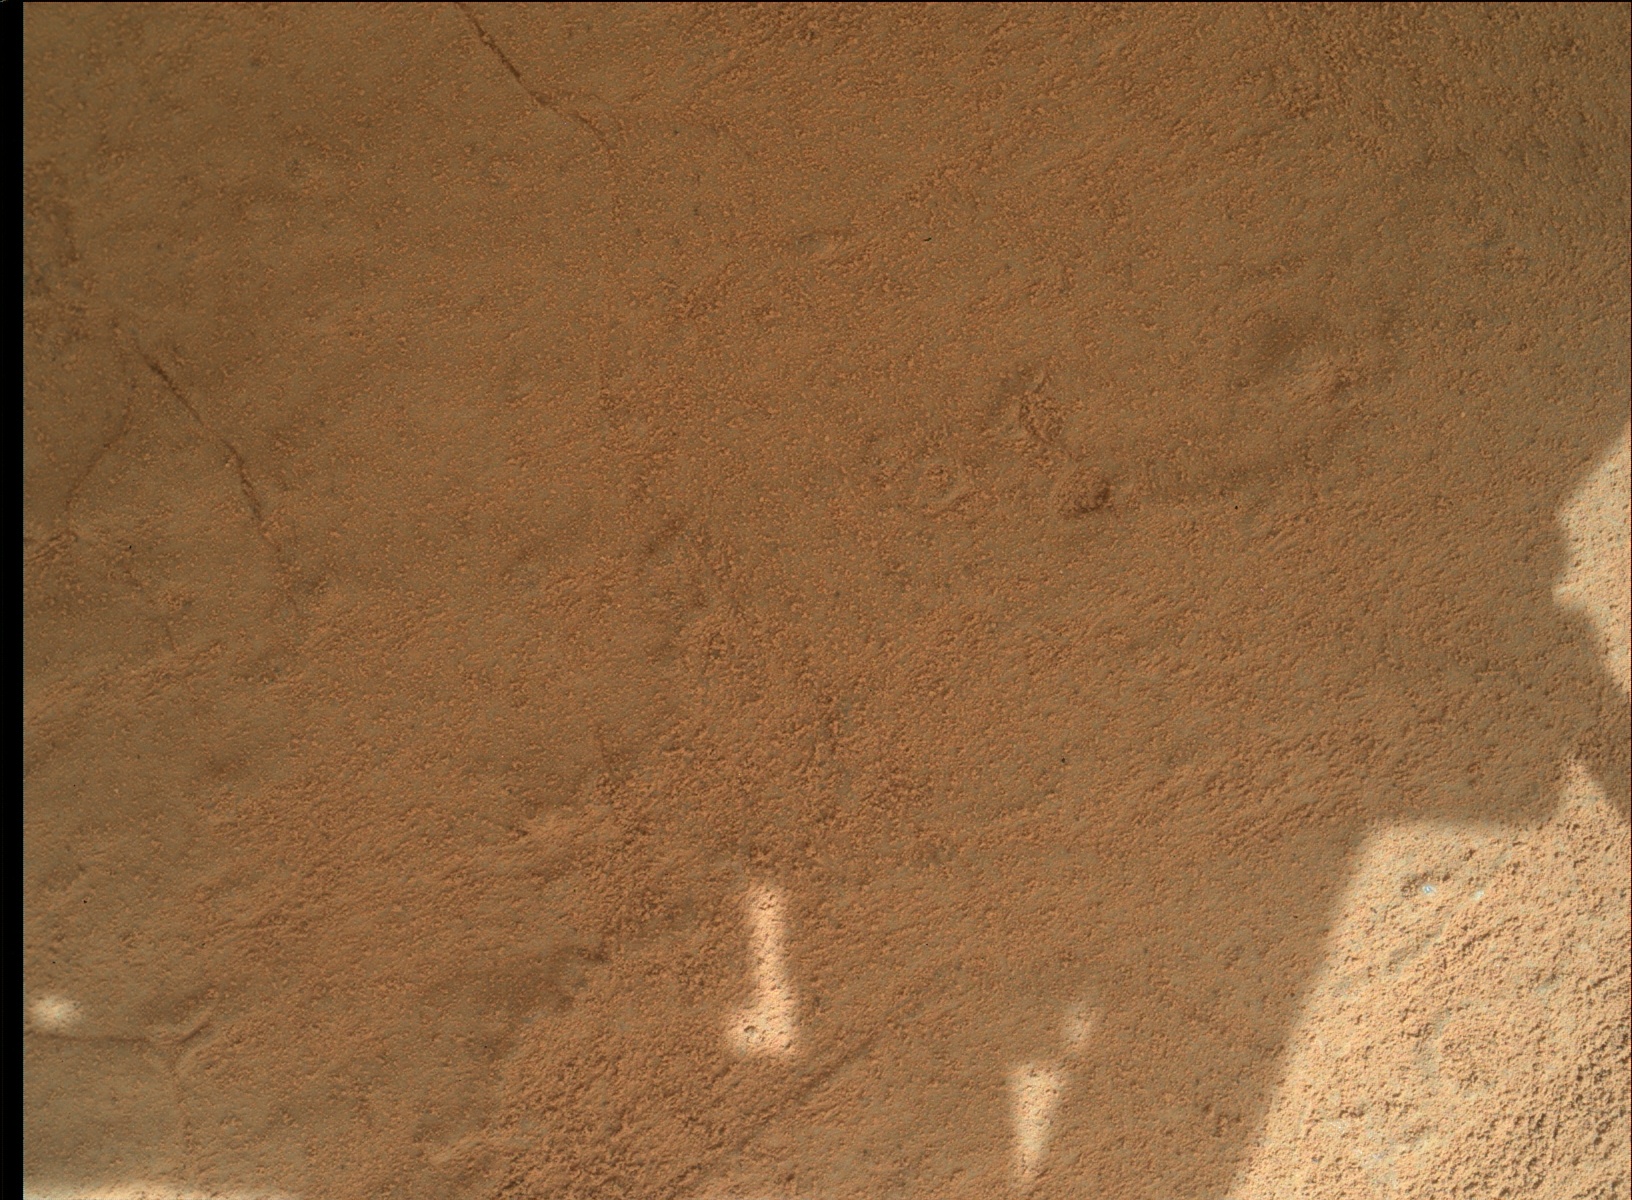 Nasa's Mars rover Curiosity acquired this image using its Mars Hand Lens Imager (MAHLI) on Sol 149